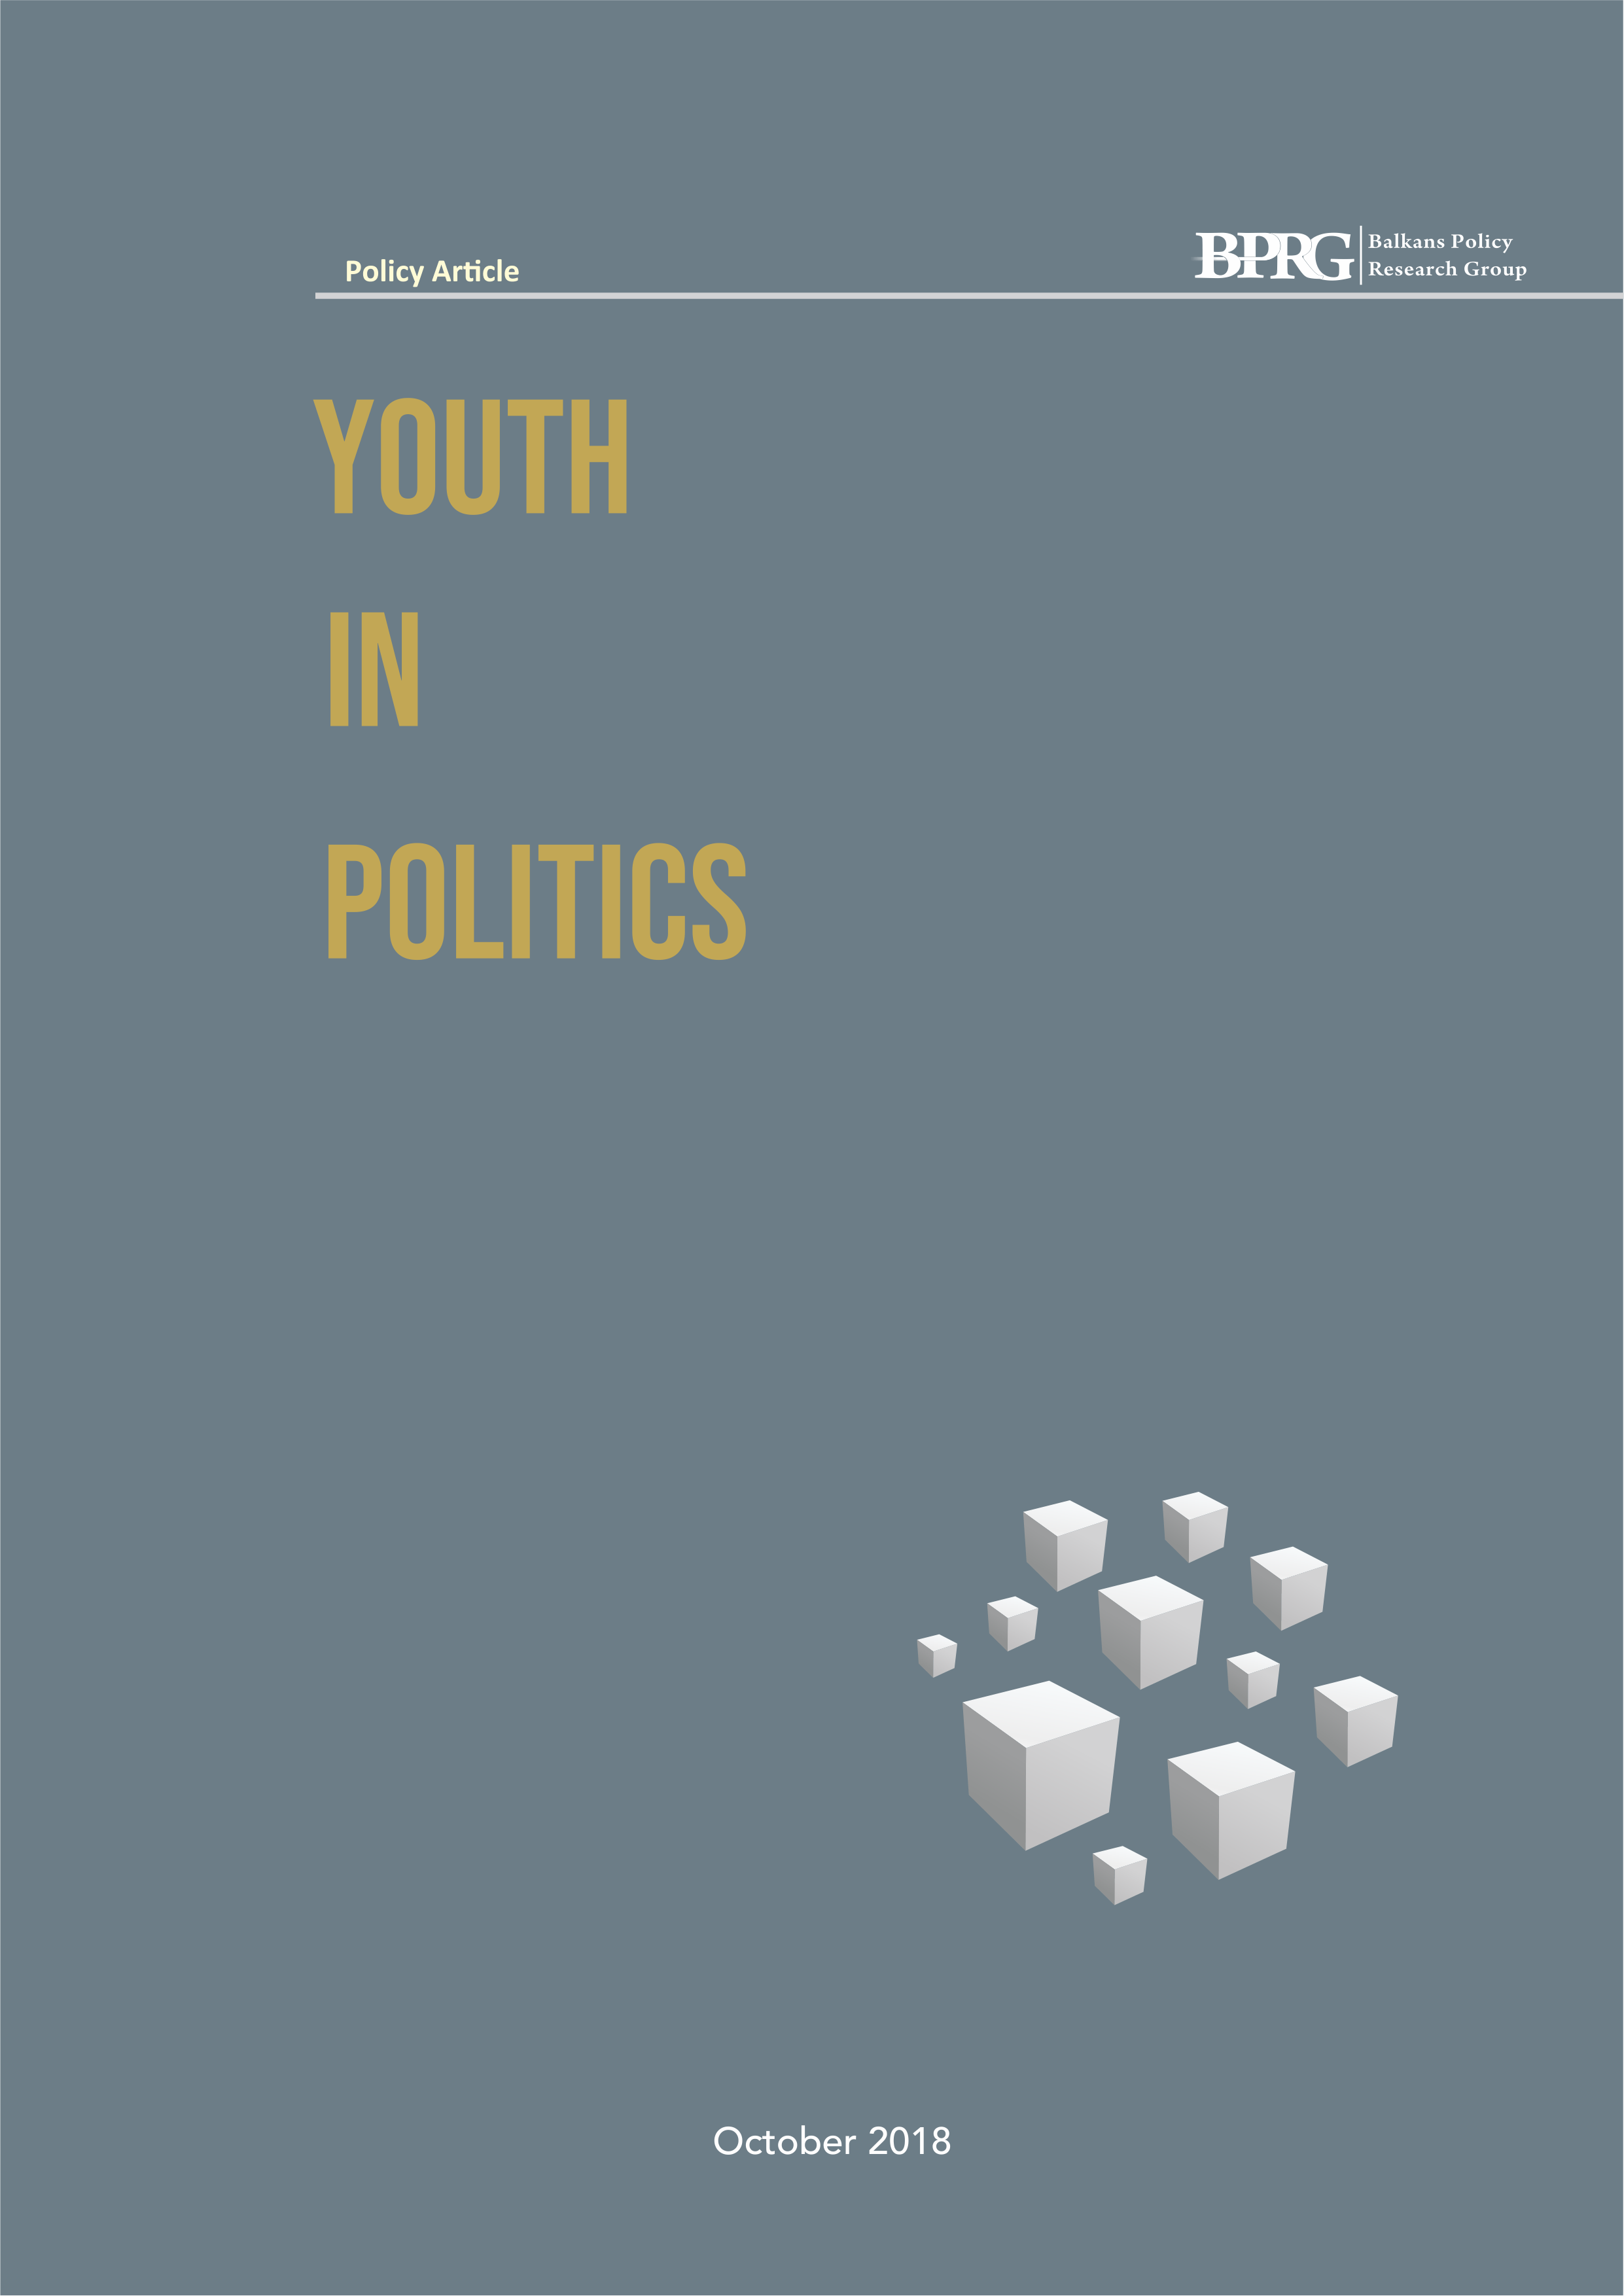 Youth in Politics